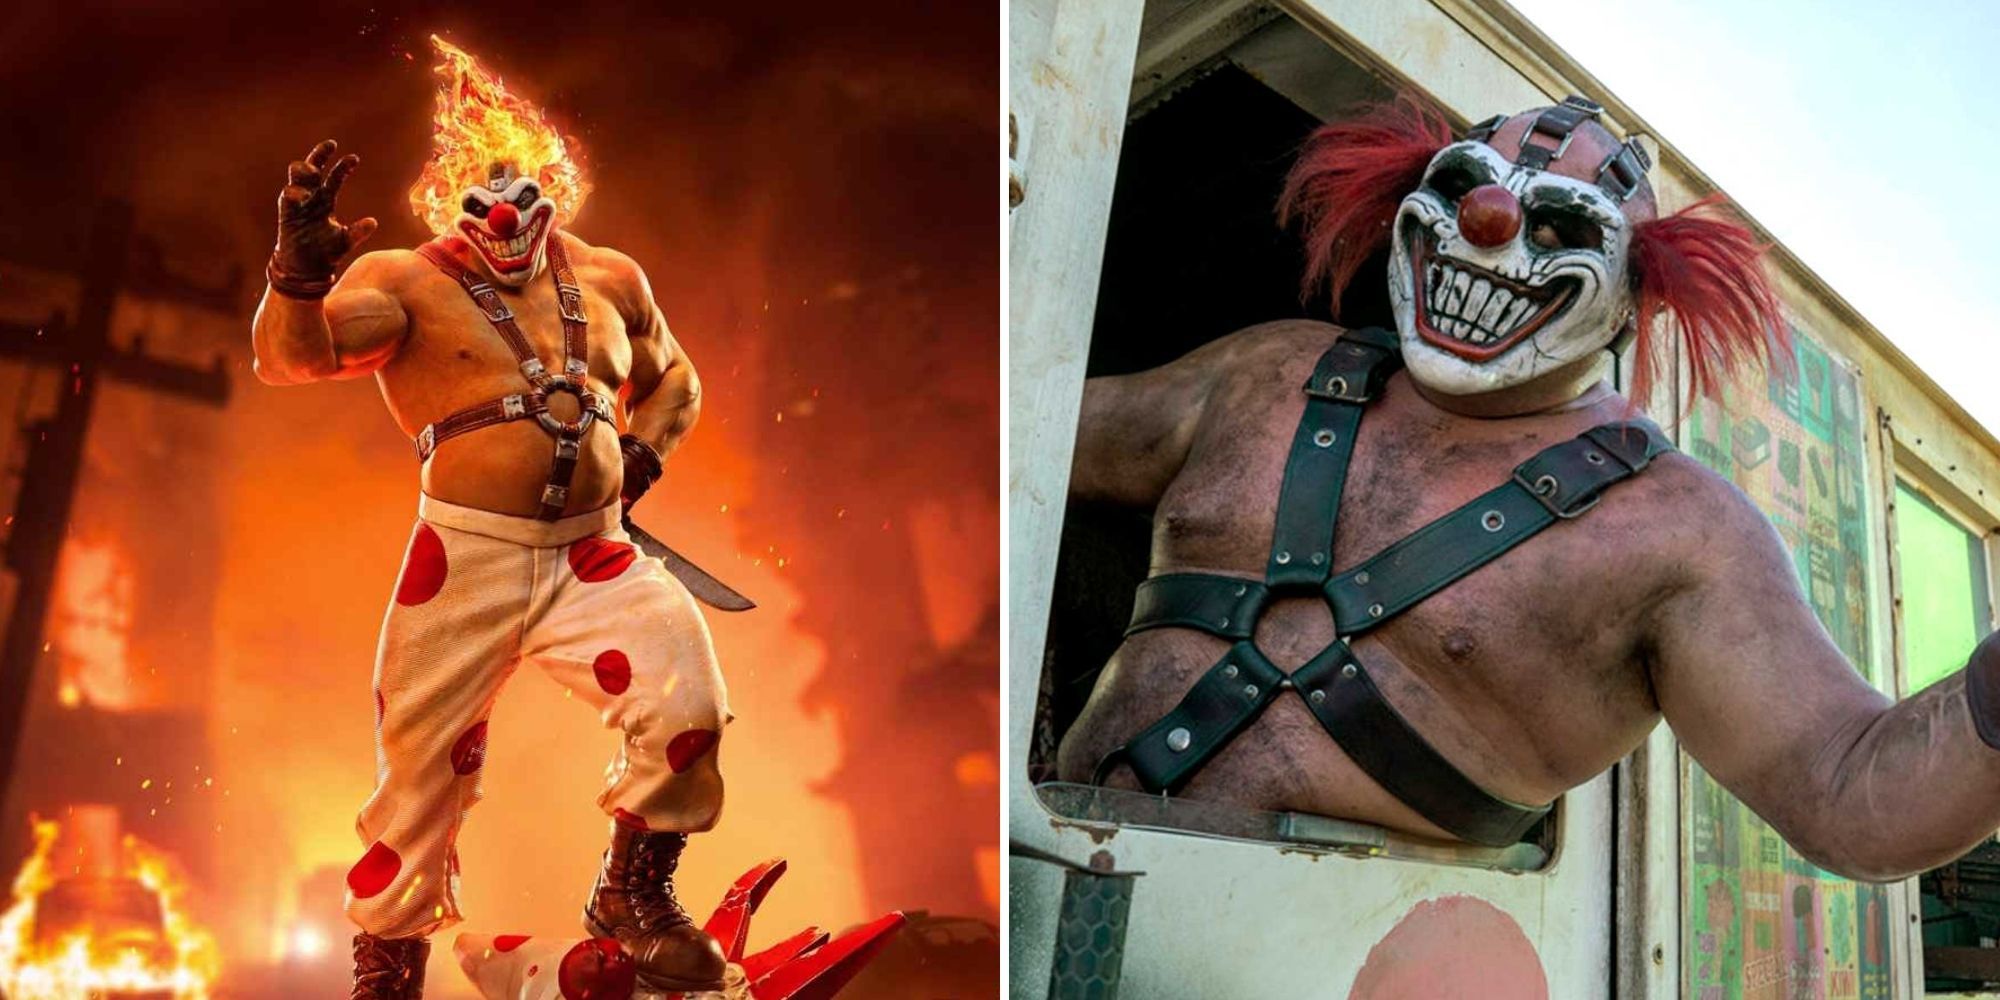 Sweet Tooth from the Twisted Metal games and Sweet Tooth in the Twisted Metal live action series